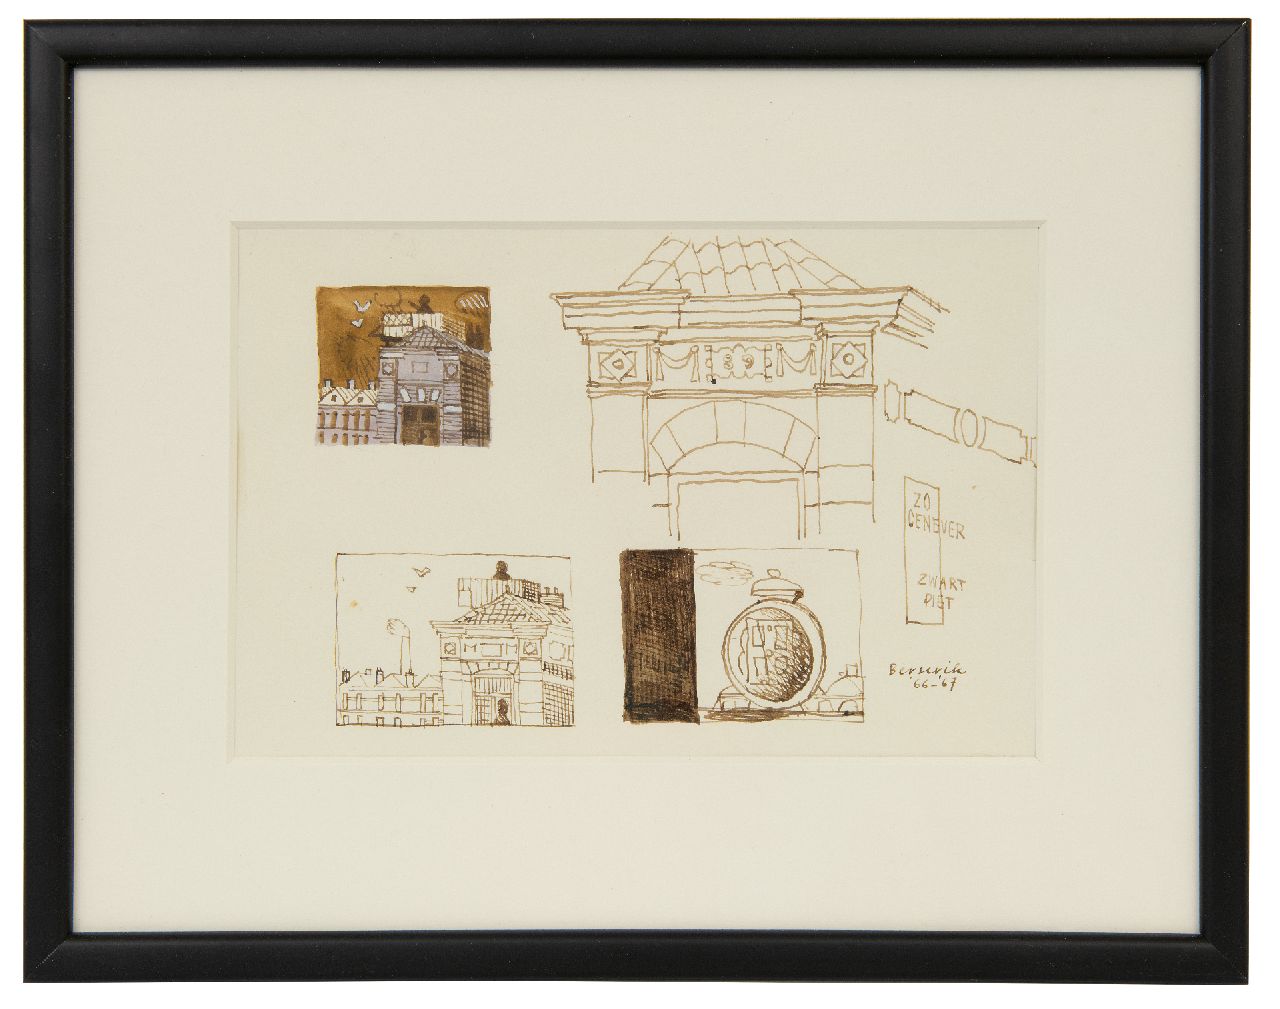 Berserik H.  | Hermanus 'Herman' Berserik | Watercolours and drawings offered for sale | Sketches of a town, pen and ink and watercolour on paper 15.8 x 23.7 cm, signed l.r. and dated '66-'67